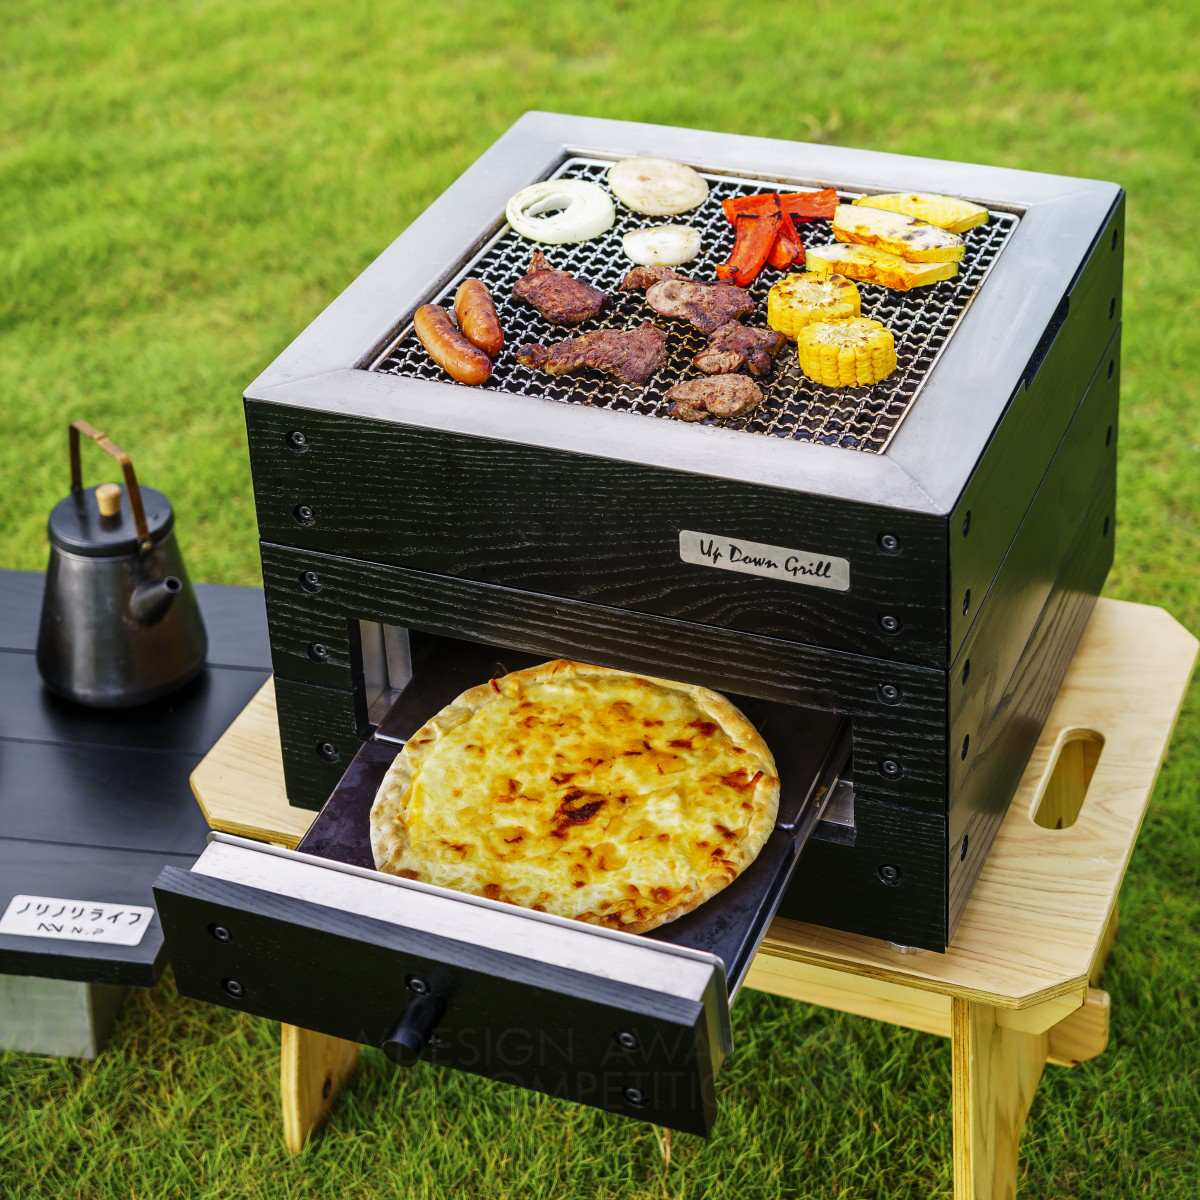 Up Down Grill <b>Portable Oven